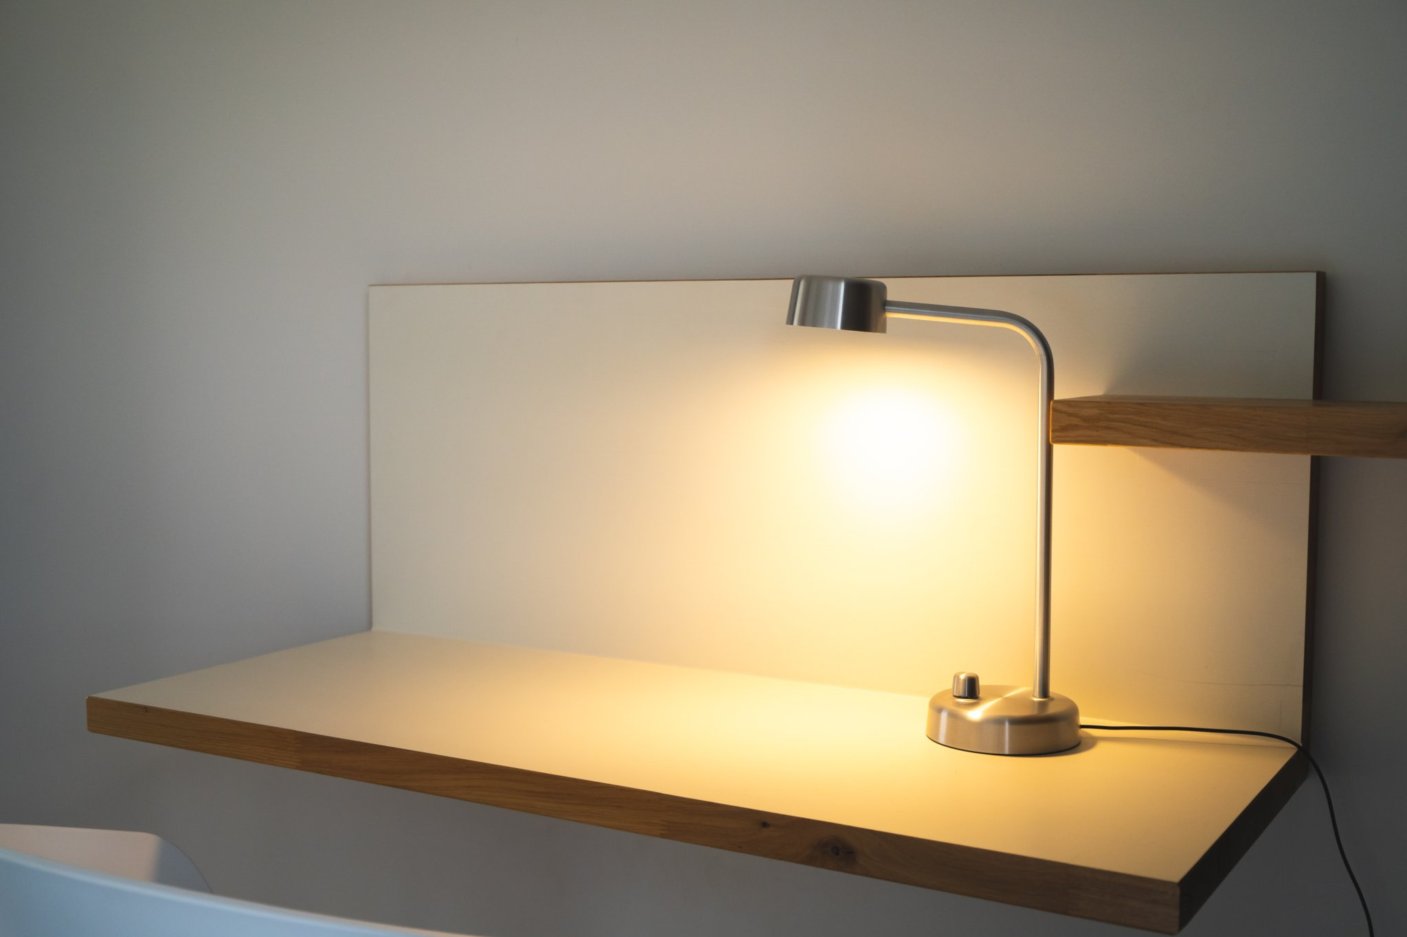 Bedstand with lamp